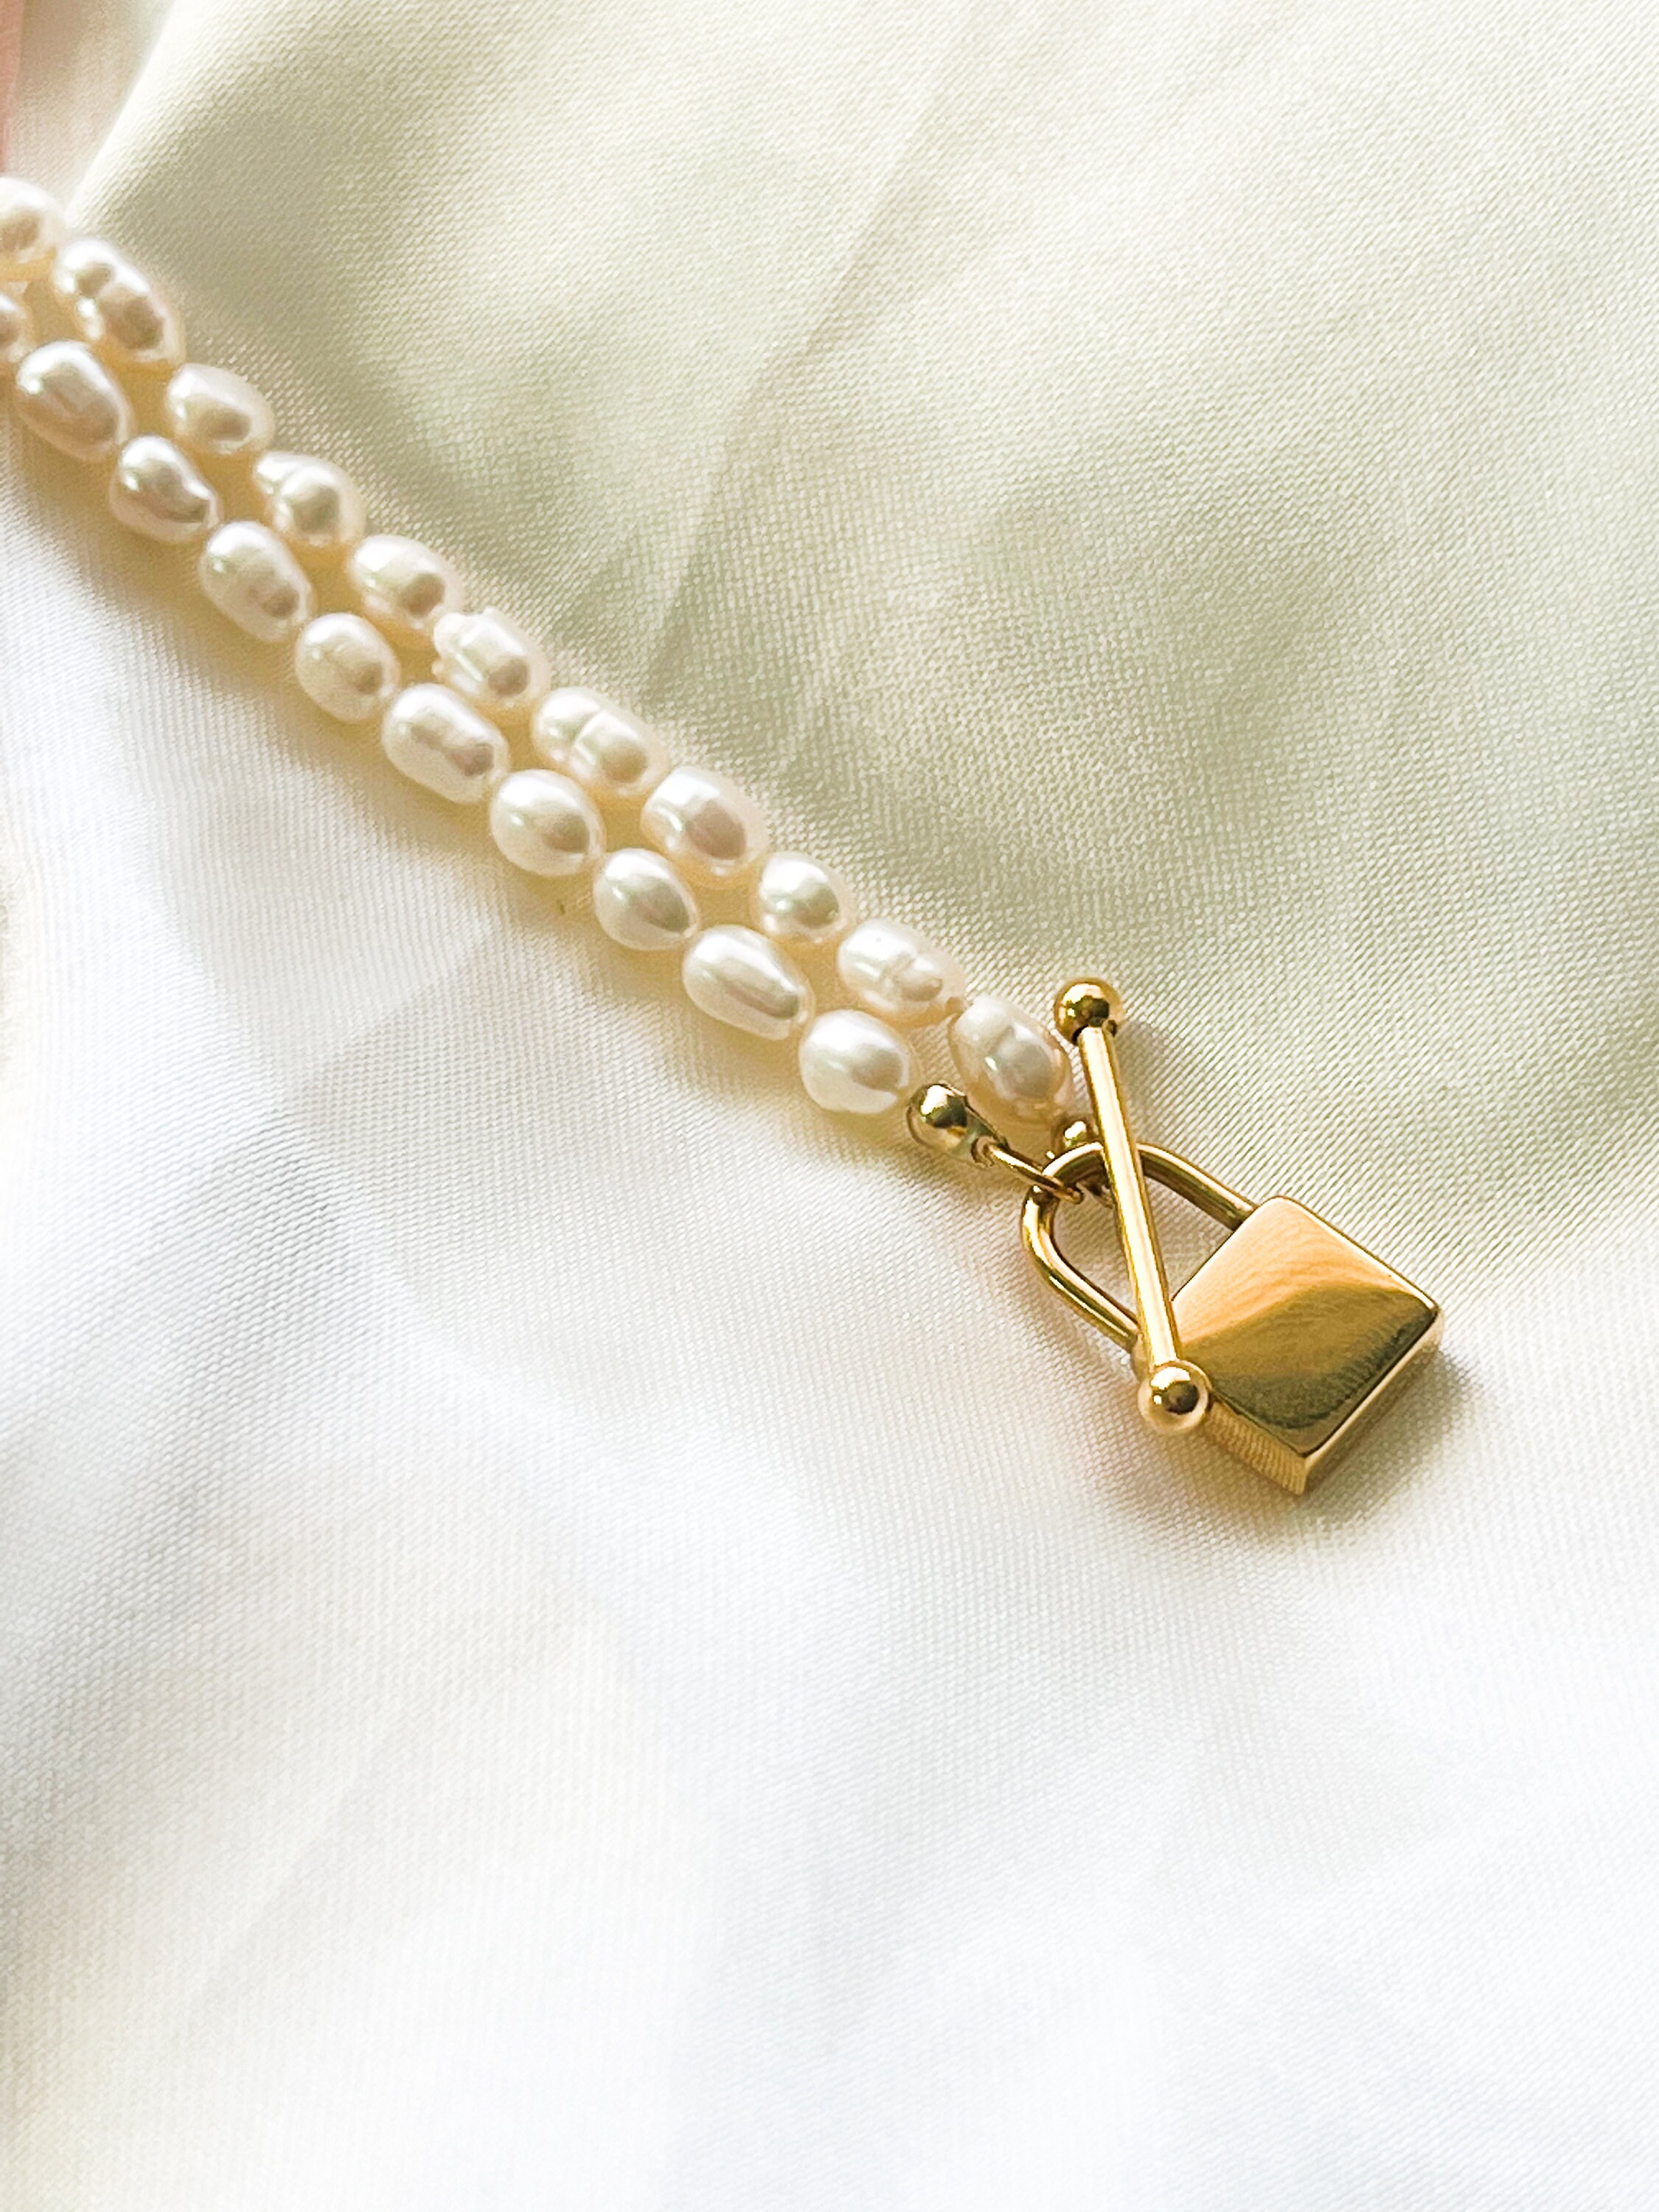 Repurposed Vintage Louis Vuitton Lock & Key Necklace (Lock- Pearl Necklace (15 in + 2 in ext))